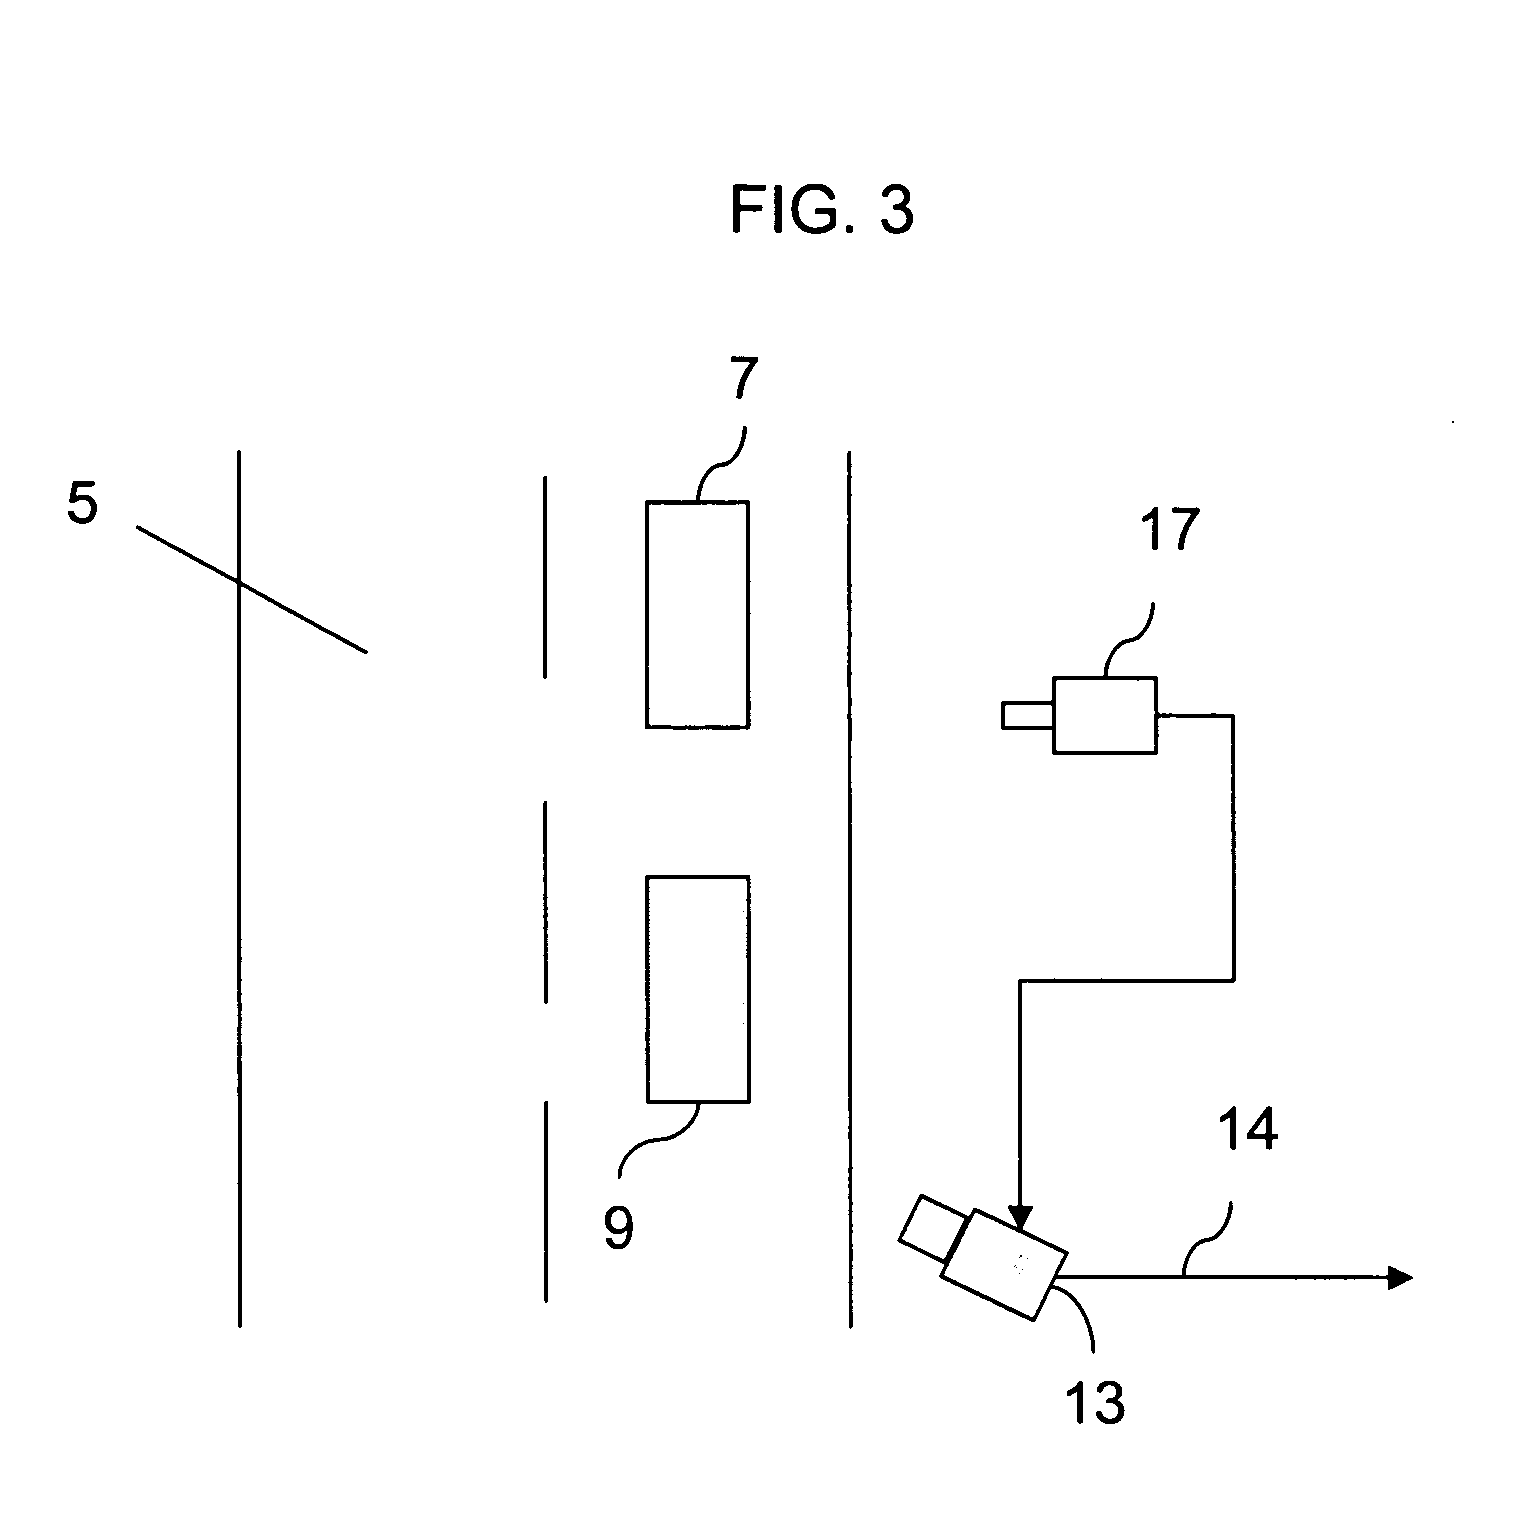 Method and system to improve traffic flow